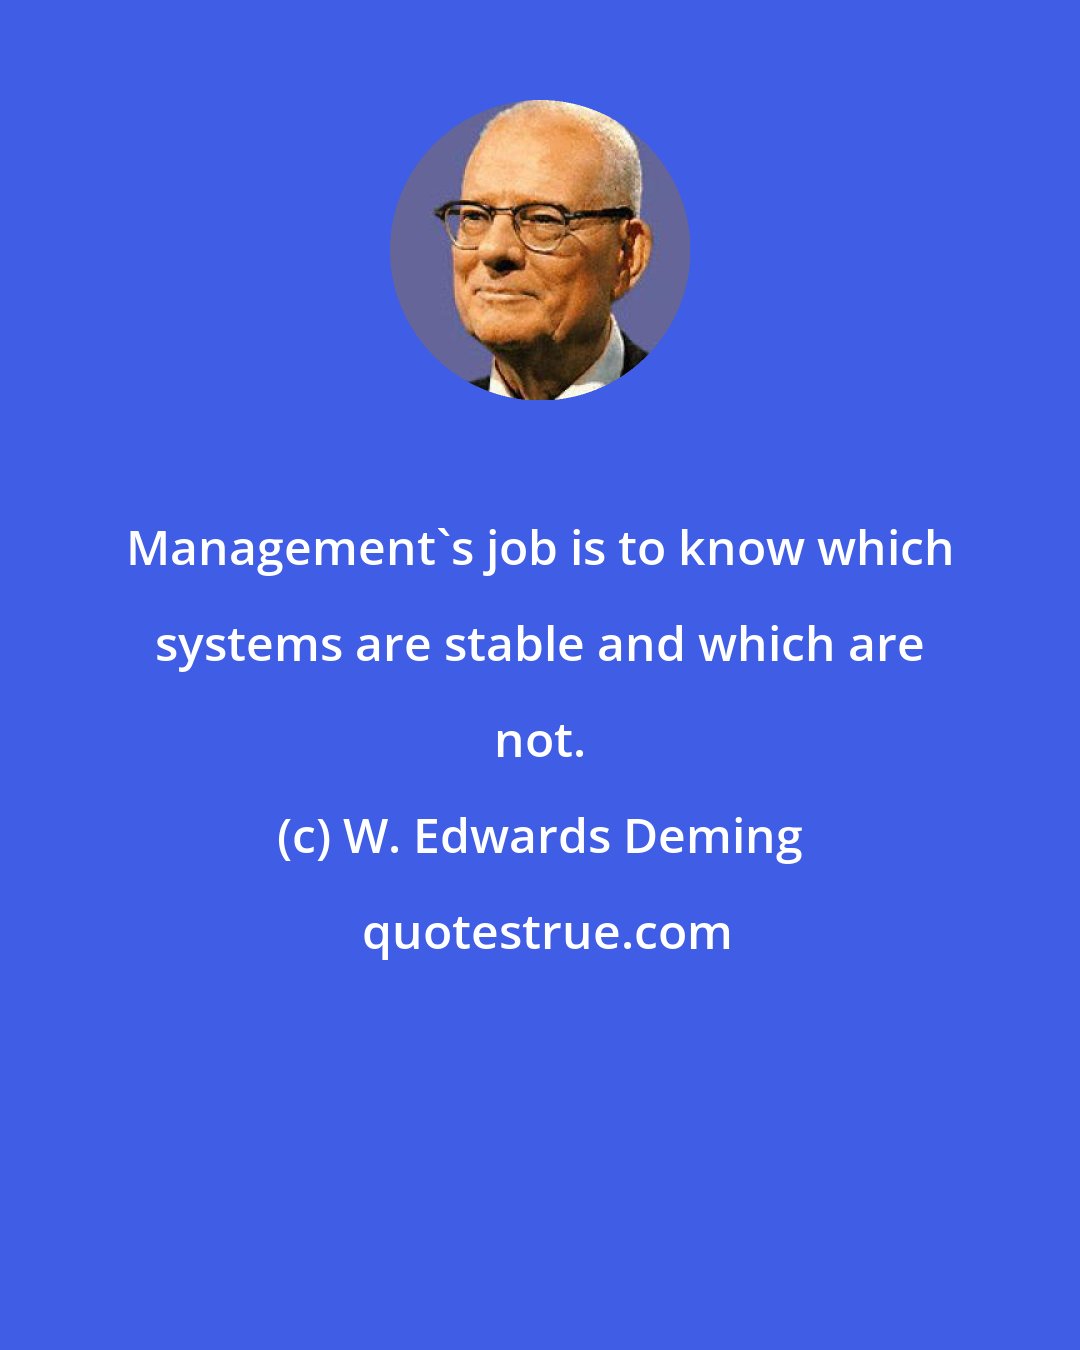 W. Edwards Deming: Management's job is to know which systems are stable and which are not.